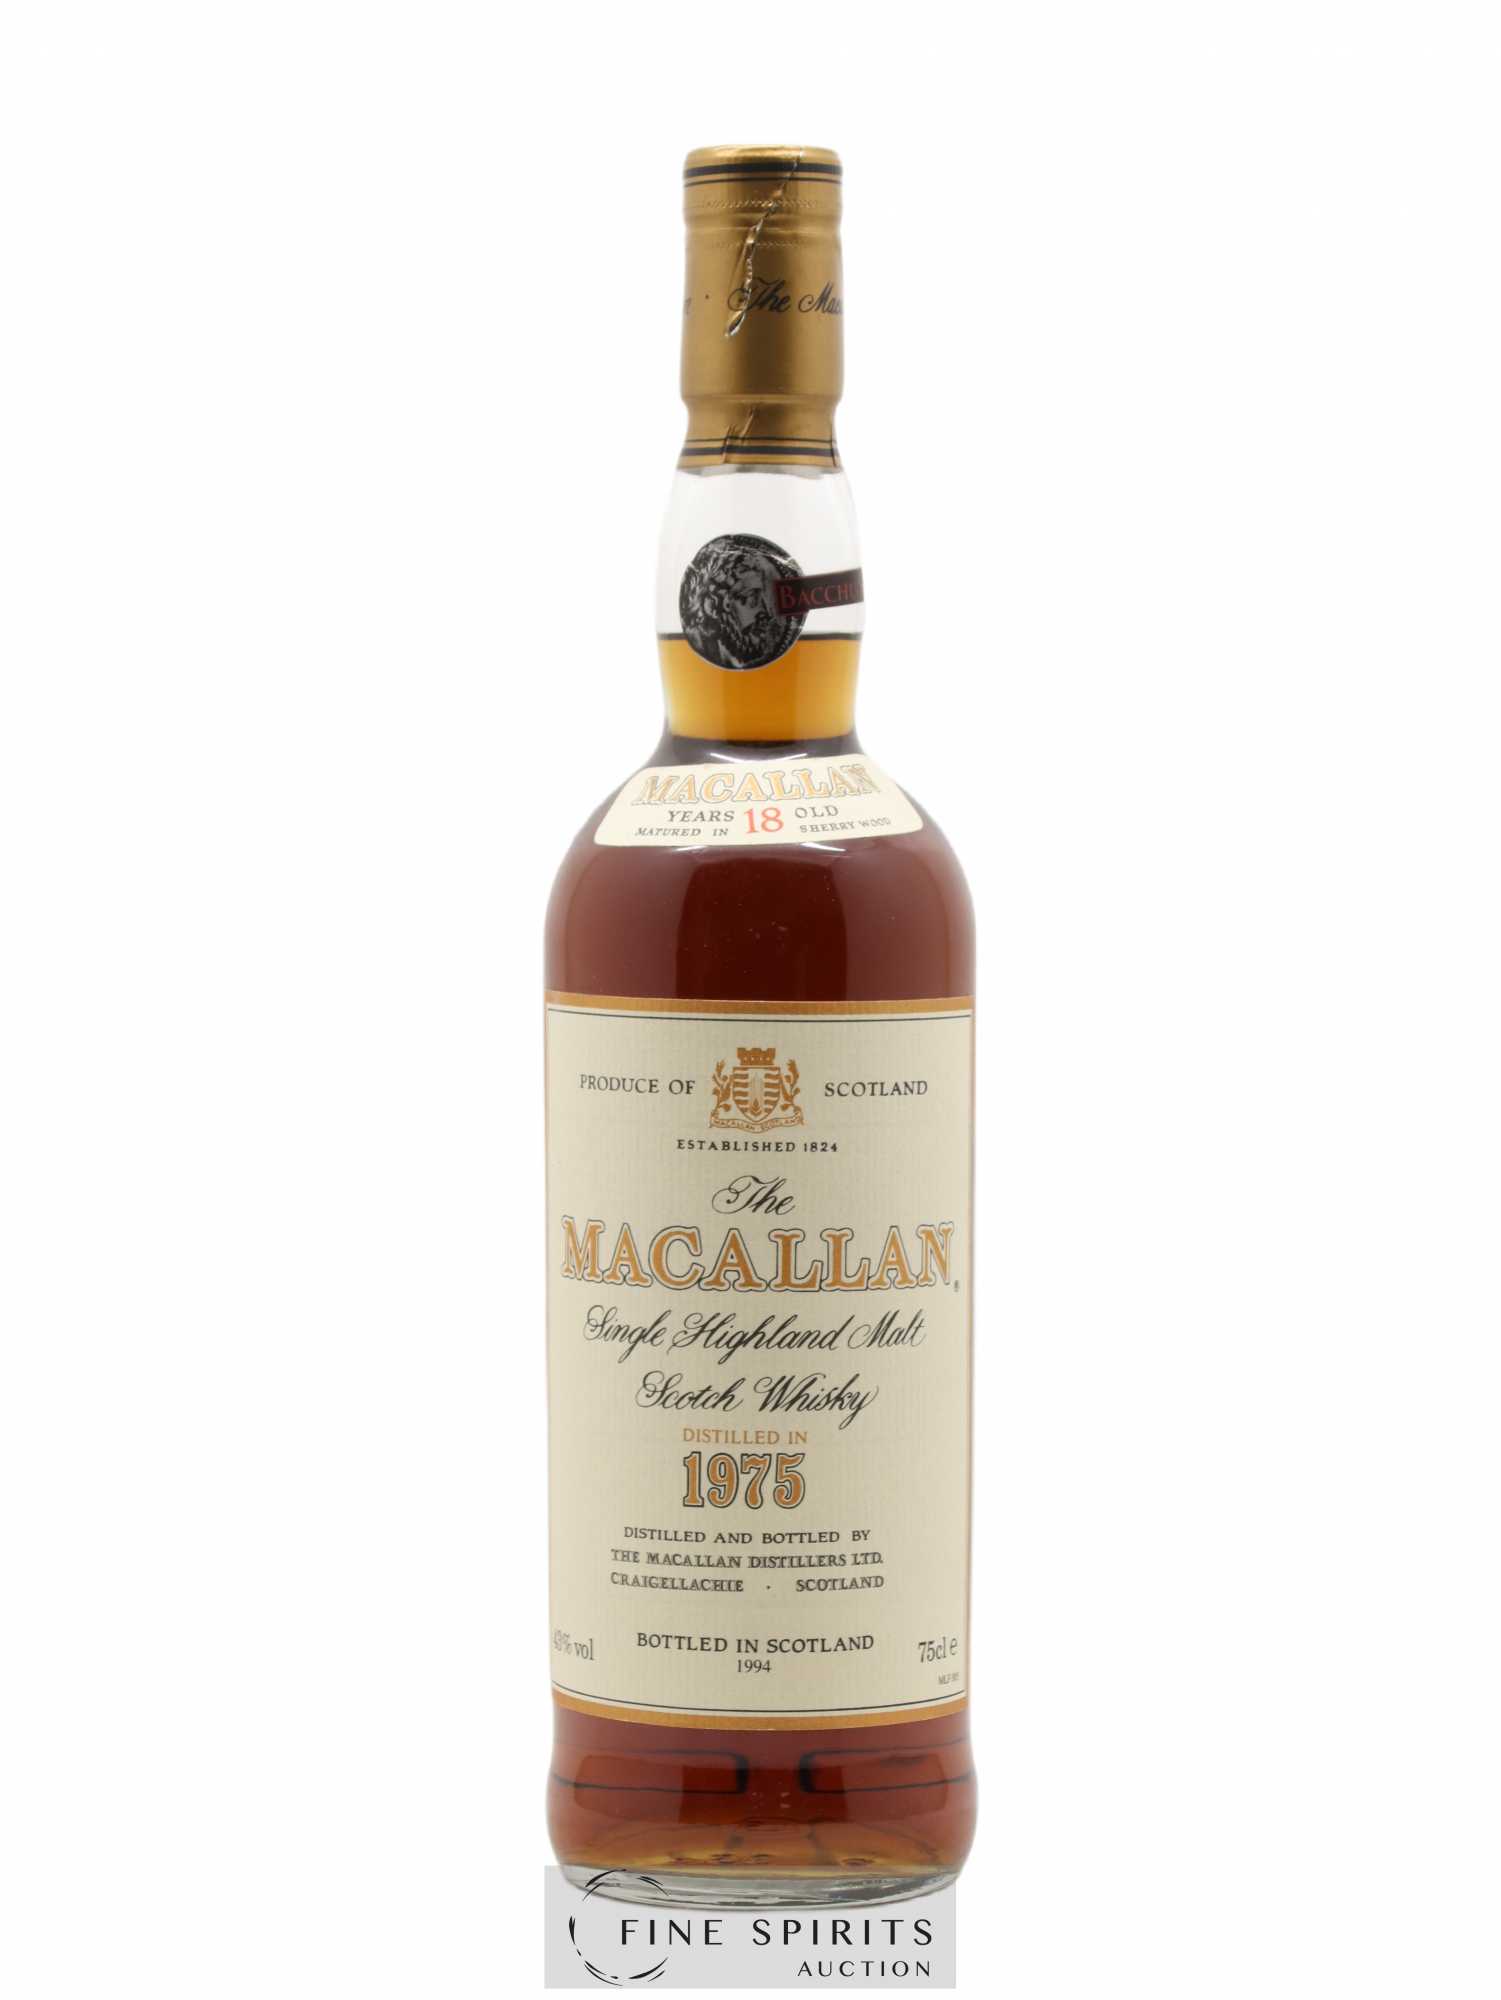 Macallan (The) 18 years 1975 Of. Sherry Wood Matured - bottled 1994